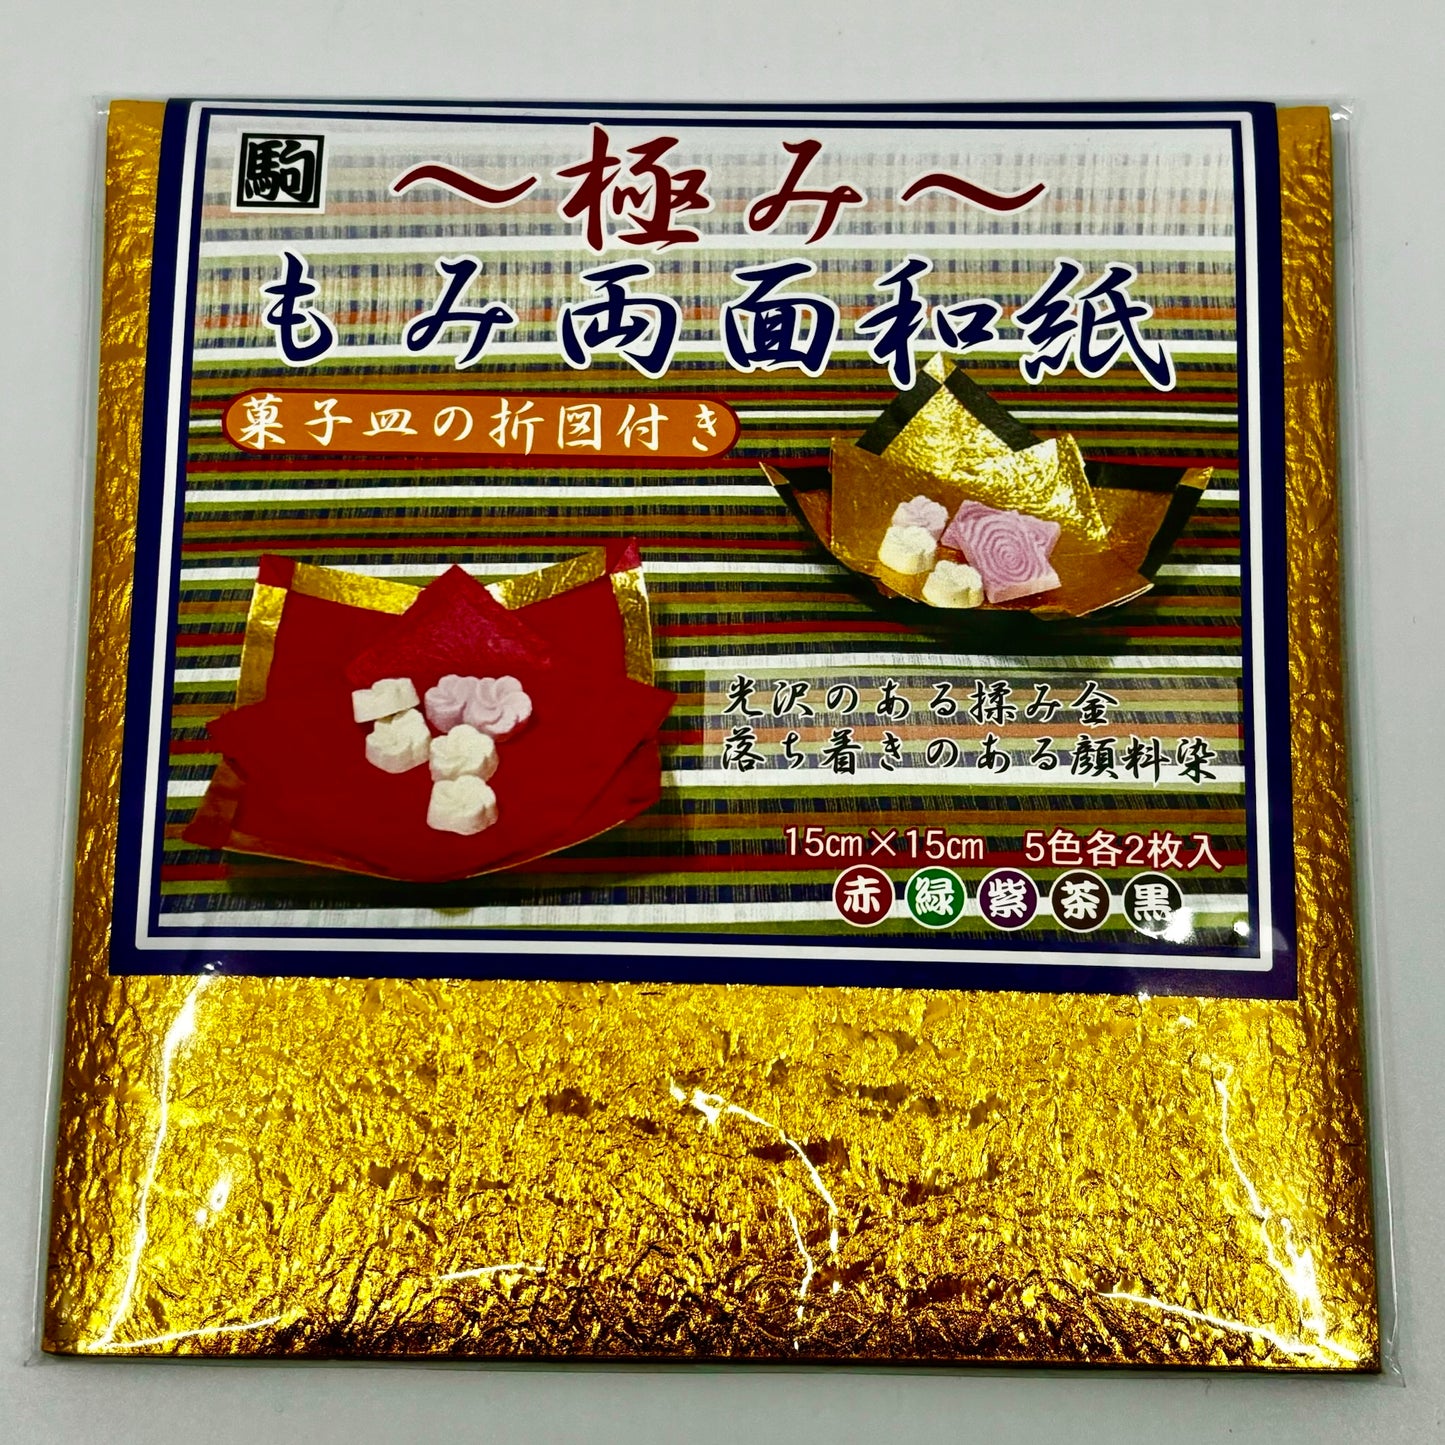 Crumpled Duo Washi Gold/Color 6inch (15cm) 10sheets 極みもみ両面和紙